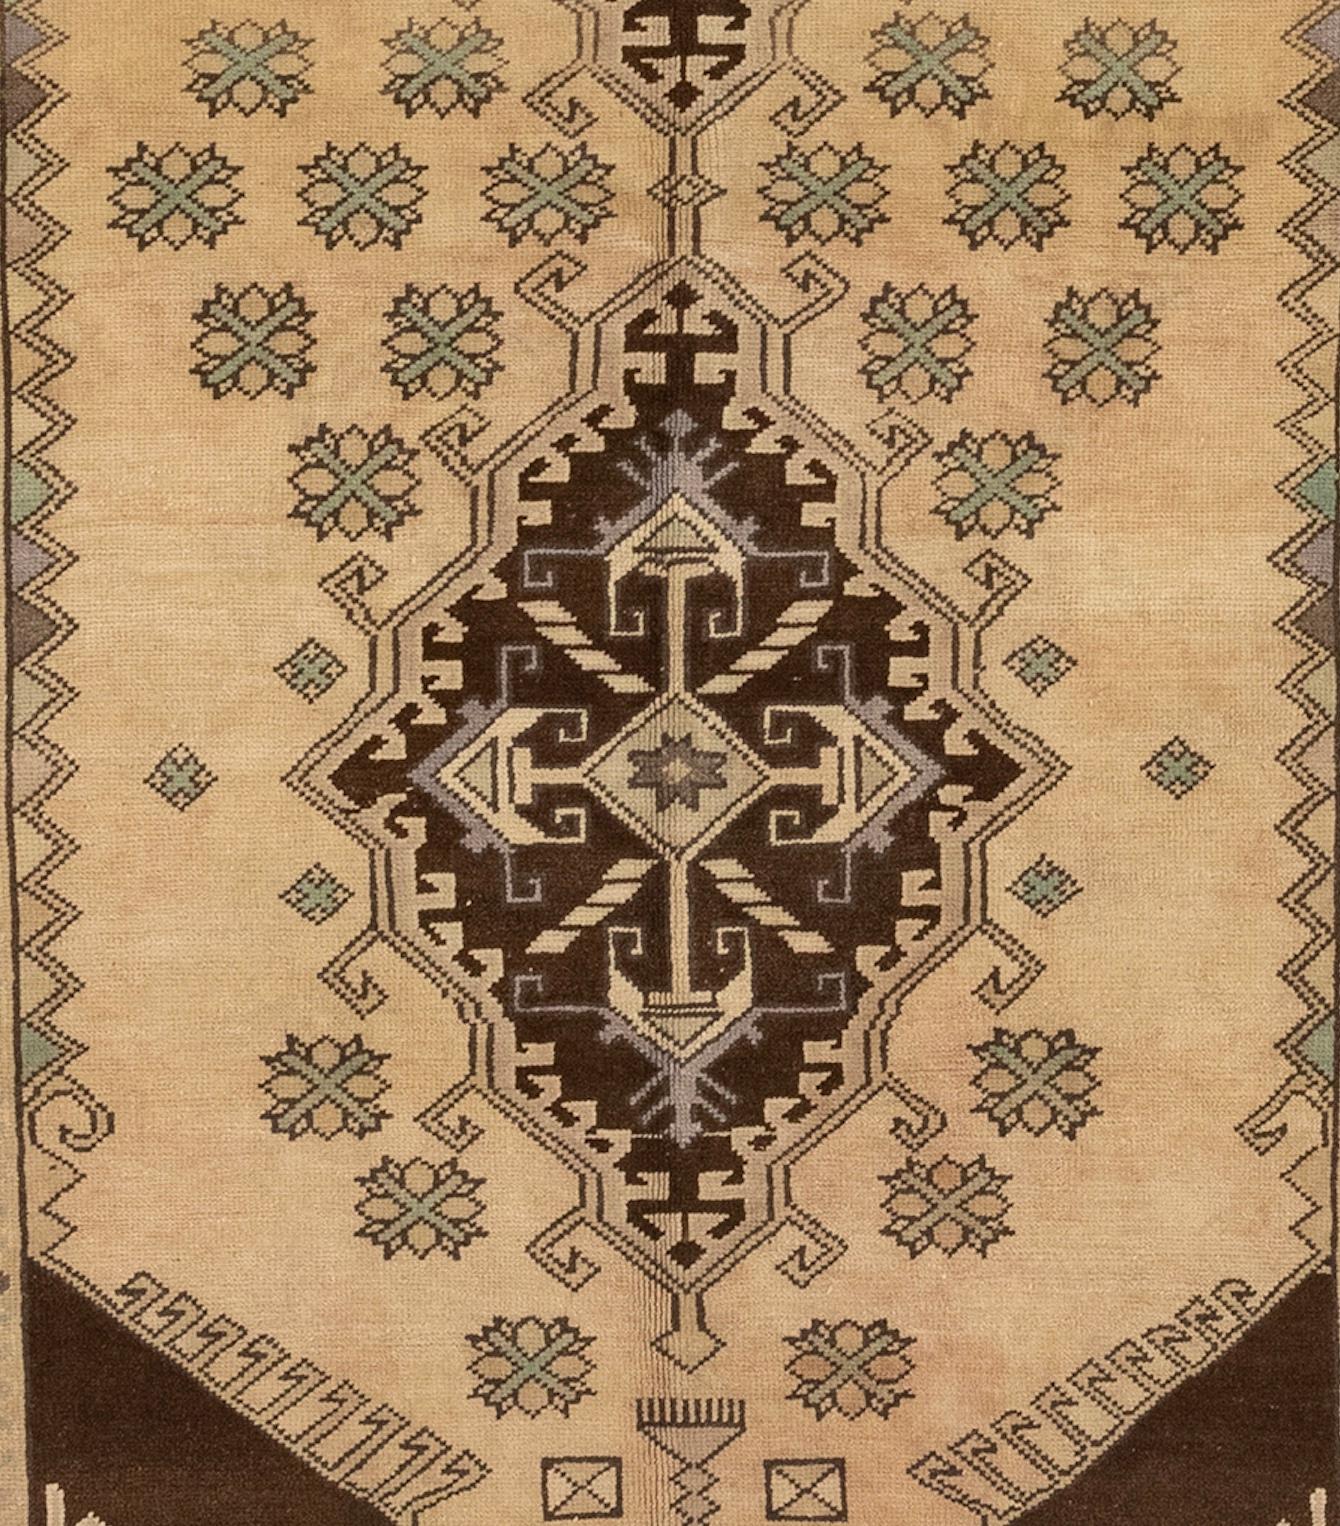 Vintage Oushak rugs are a type of handwoven rug that originated in Turkey. These rugs are known for their soft, muted color palettes, with beige and tan being particularly popular shades. Vintage Oushak rugs are prized for their fine craftsmanship,